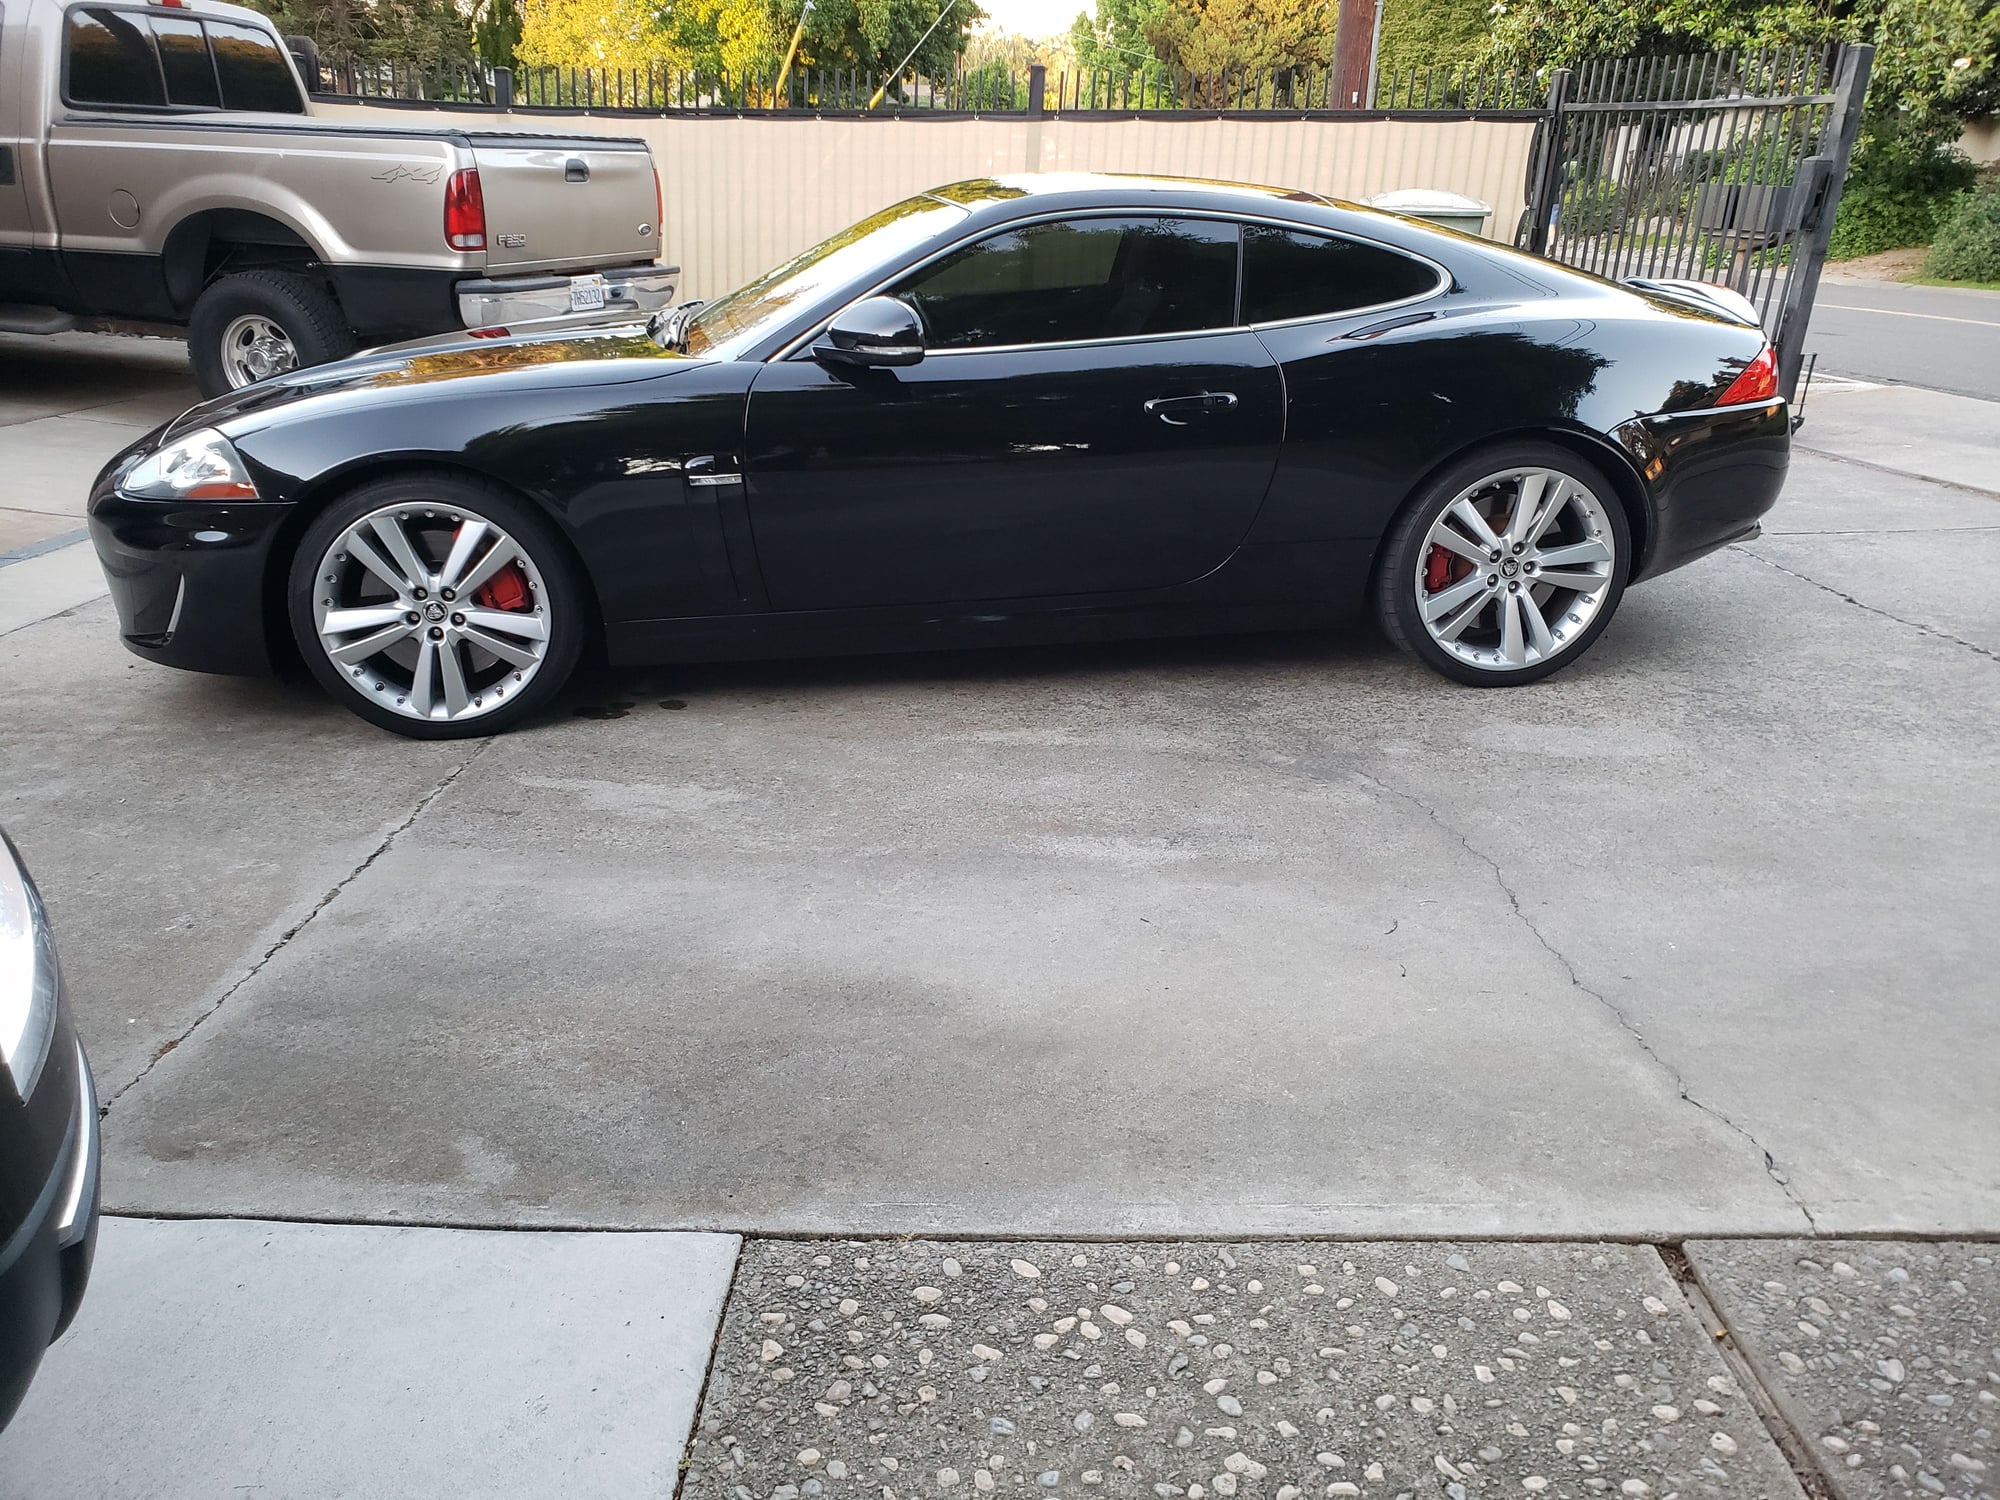 2011 Jaguar XKR - 2011 xkr - Used - VIN Sajwa4dc9bmb42141 - 72,000 Miles - 8 cyl - 2WD - Automatic - Coupe - Black - Riverbank, CA 95367, United States